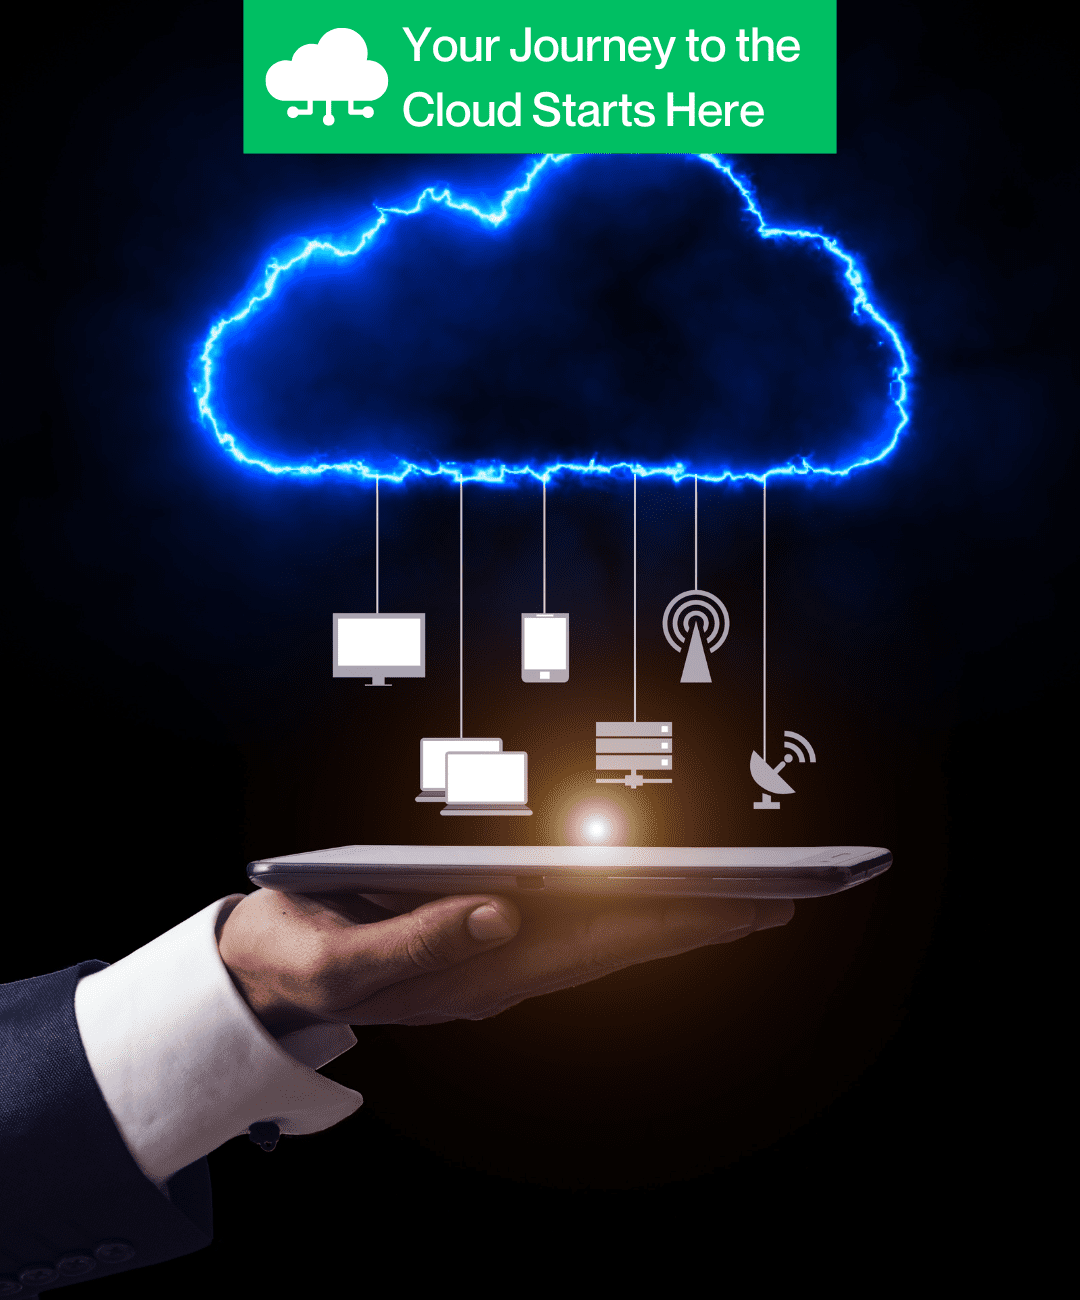 Illustration of devices connected to cloud technology, representing BDR Global's cloud transformation services.